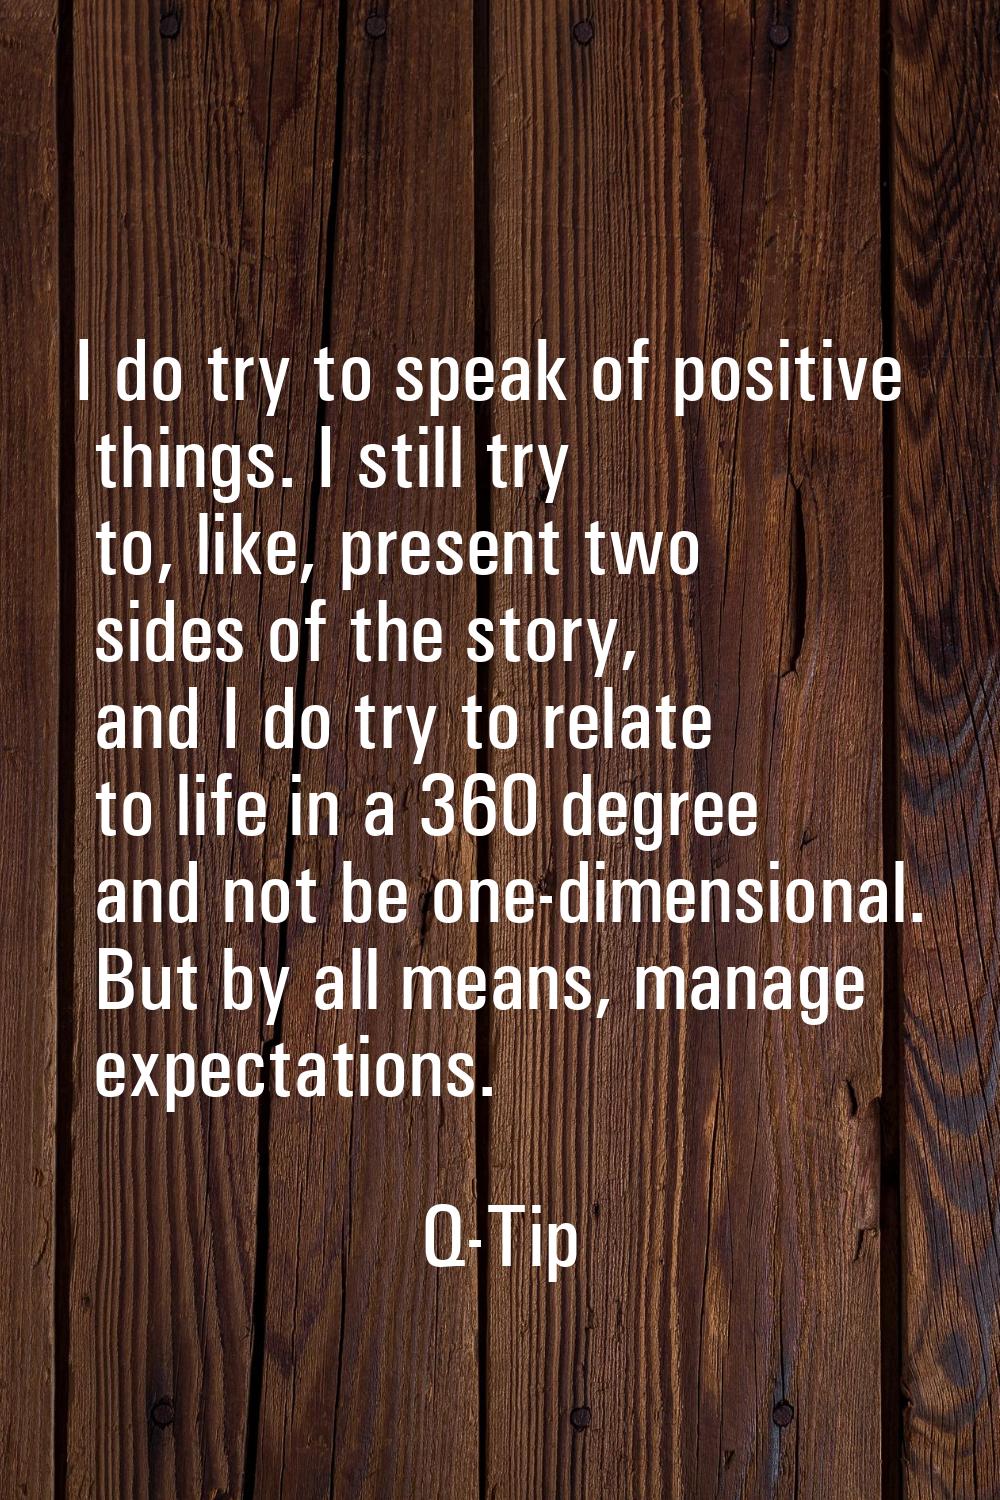 I do try to speak of positive things. I still try to, like, present two sides of the story, and I d